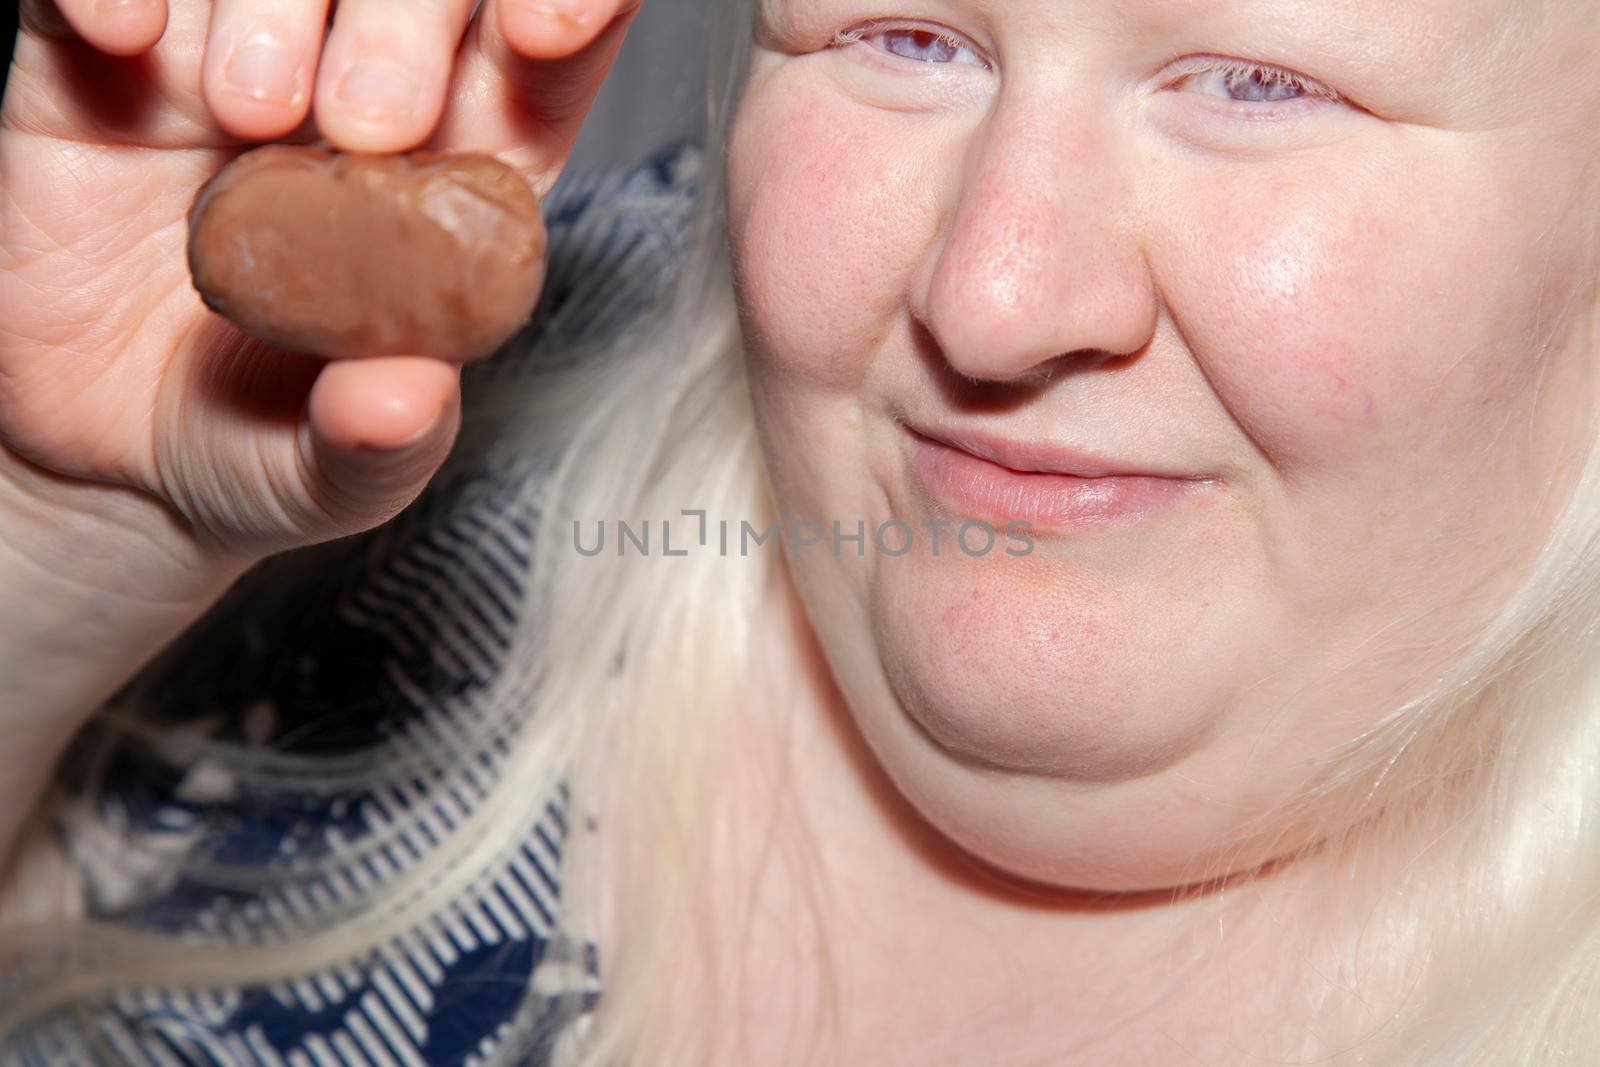 Obese, albino woman holding a piece of chocolate